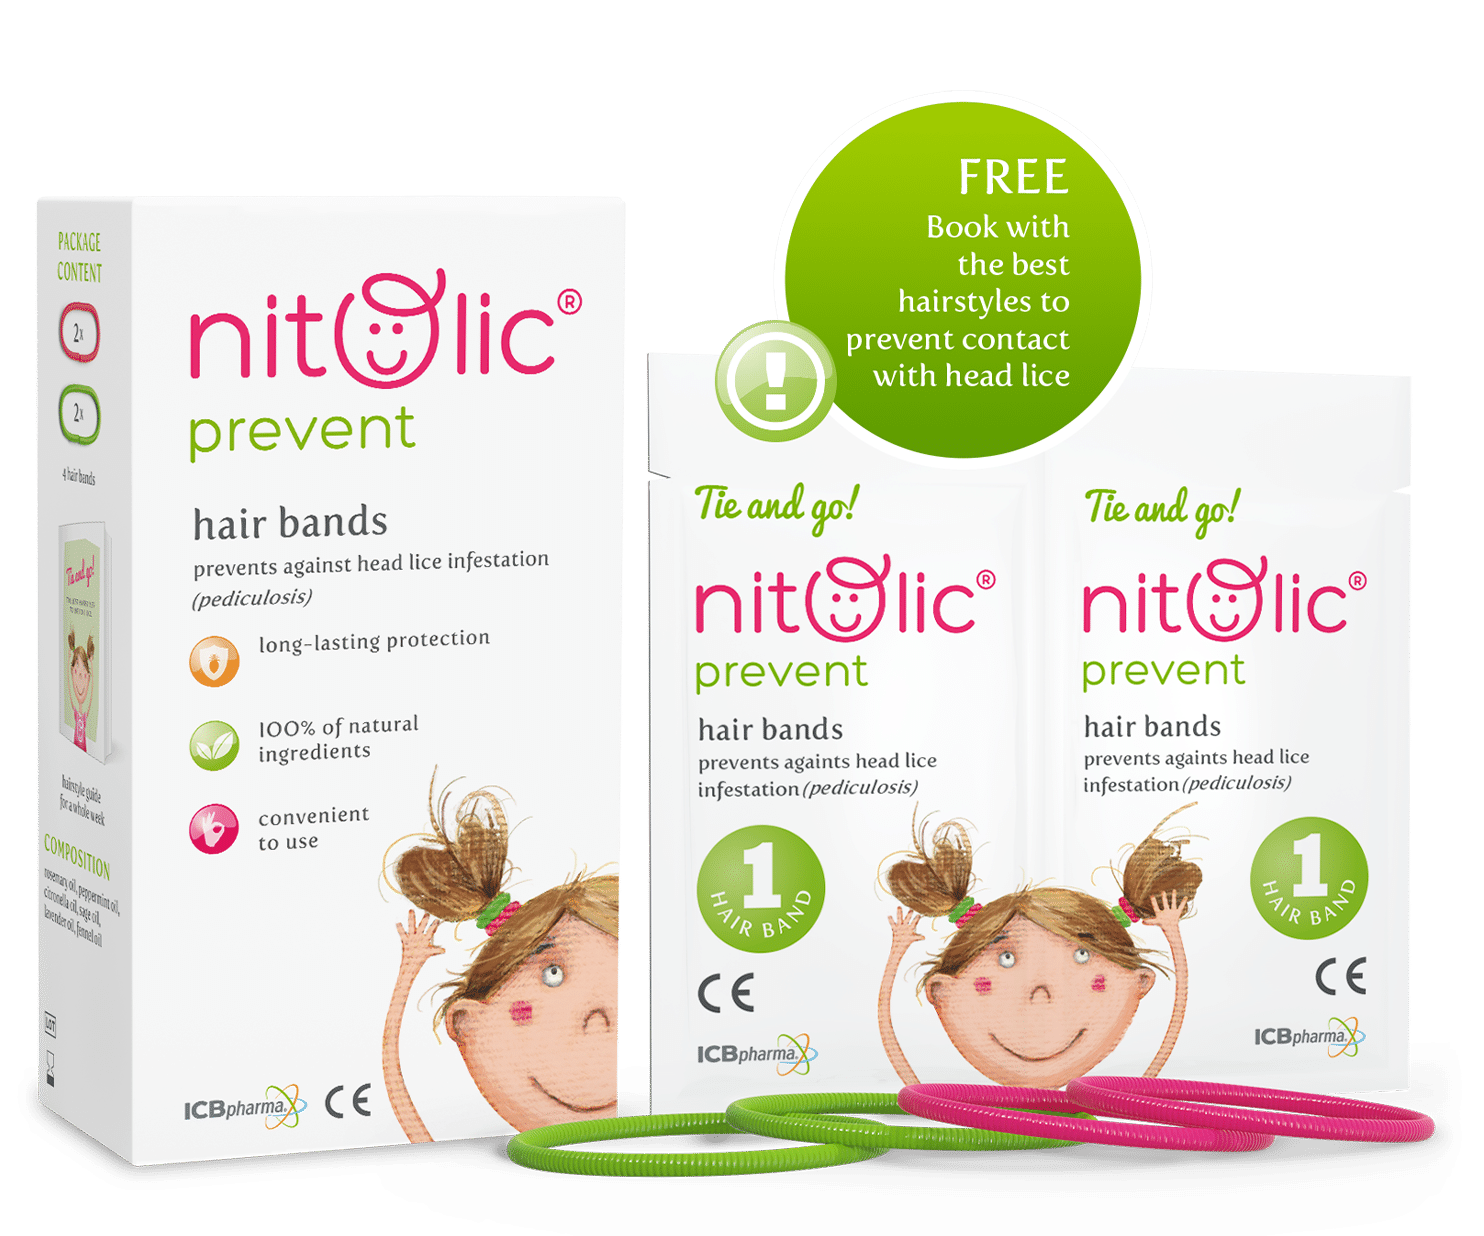 NITOLIC® prevent hair bands - Nitolic